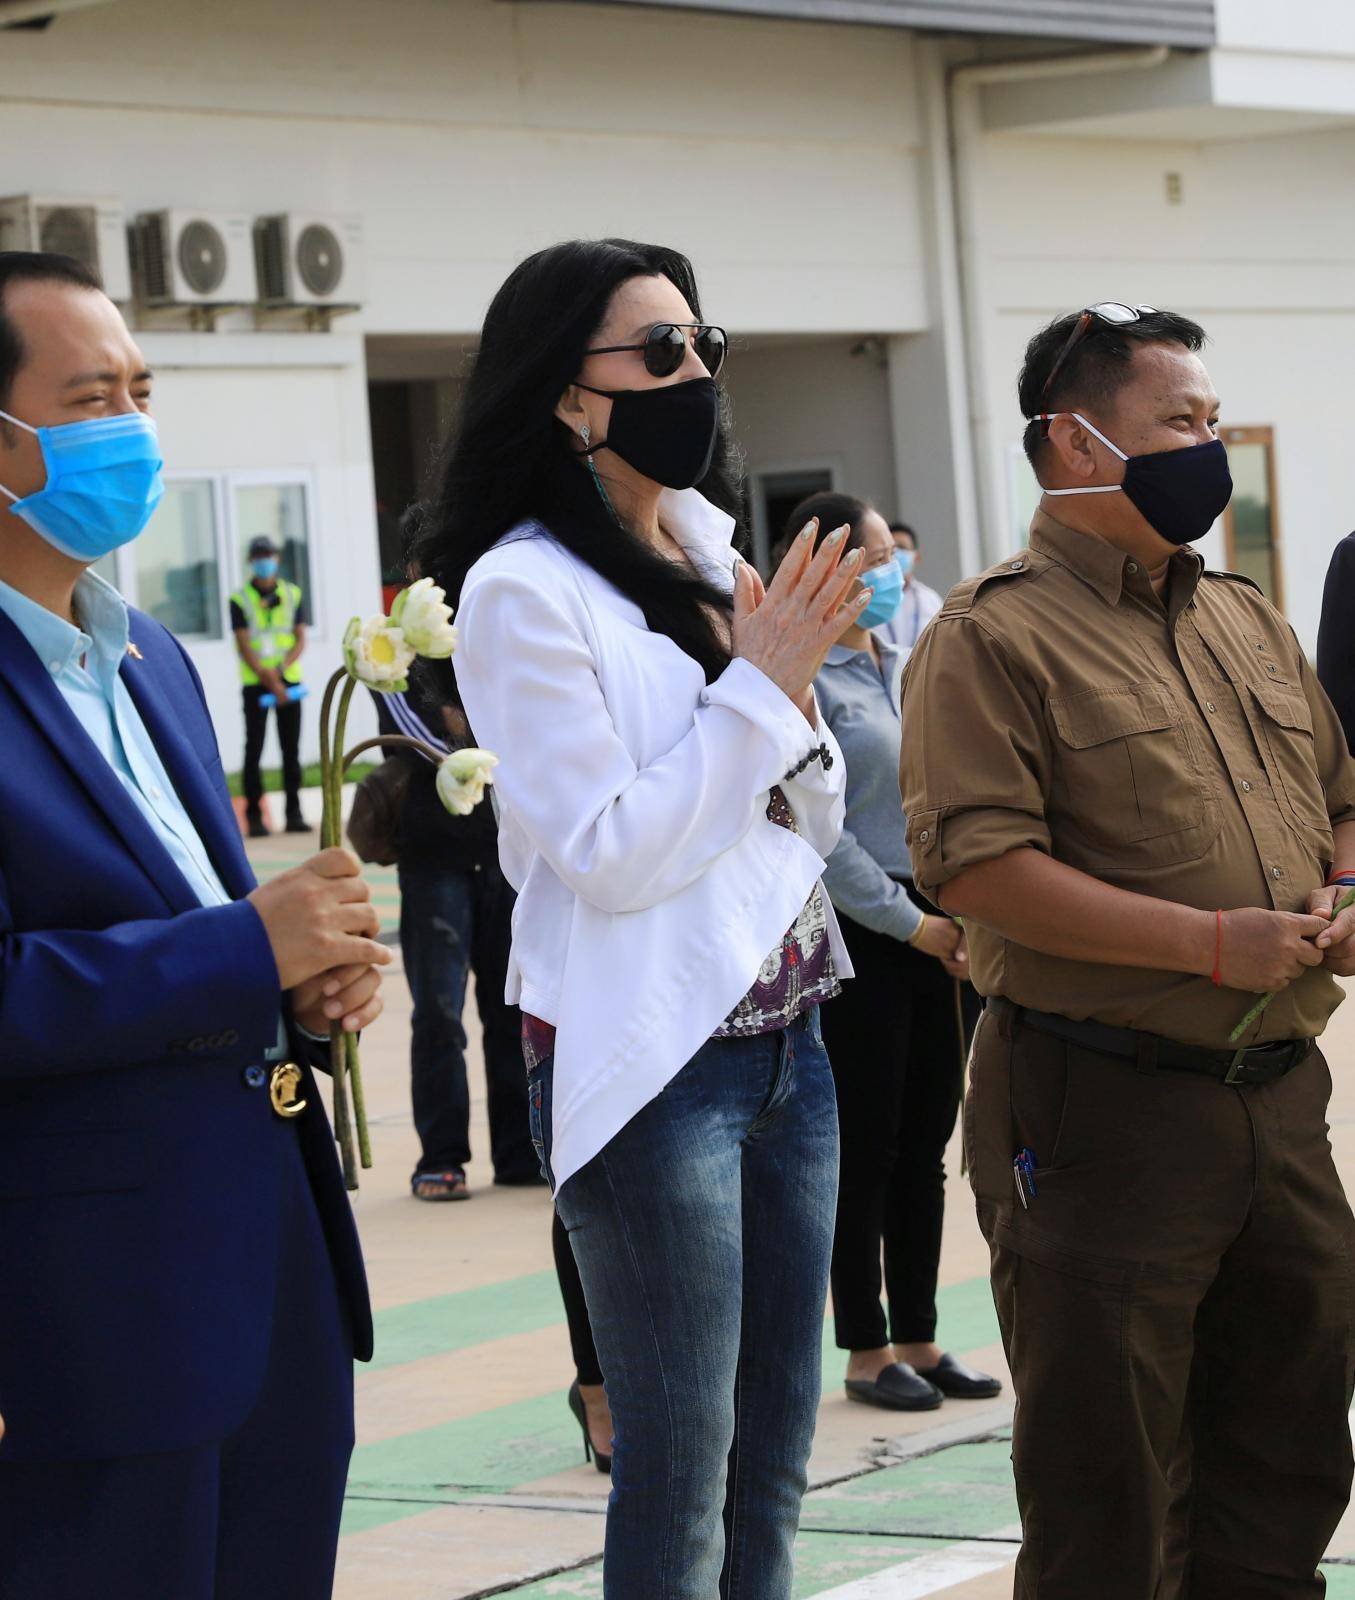 Singer Cher  waits for Kaavan, an elephant transported from Pakistan to a sanctuary in Cambodia, at the Siem Reap airport